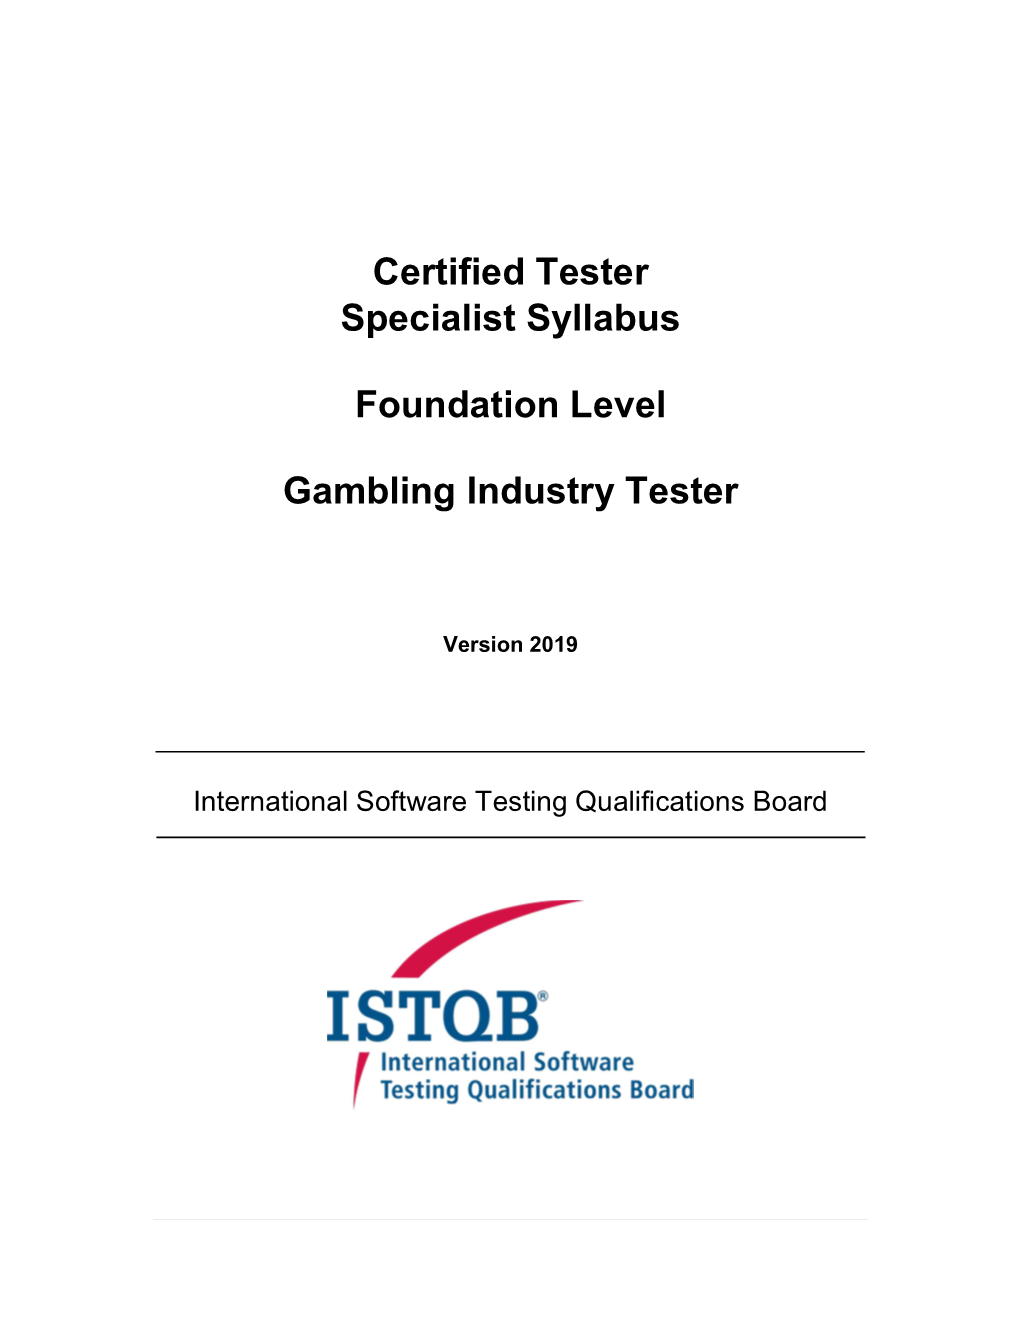 Certified Tester Specialist Syllabus Foundation Level Gambling Industry Tester